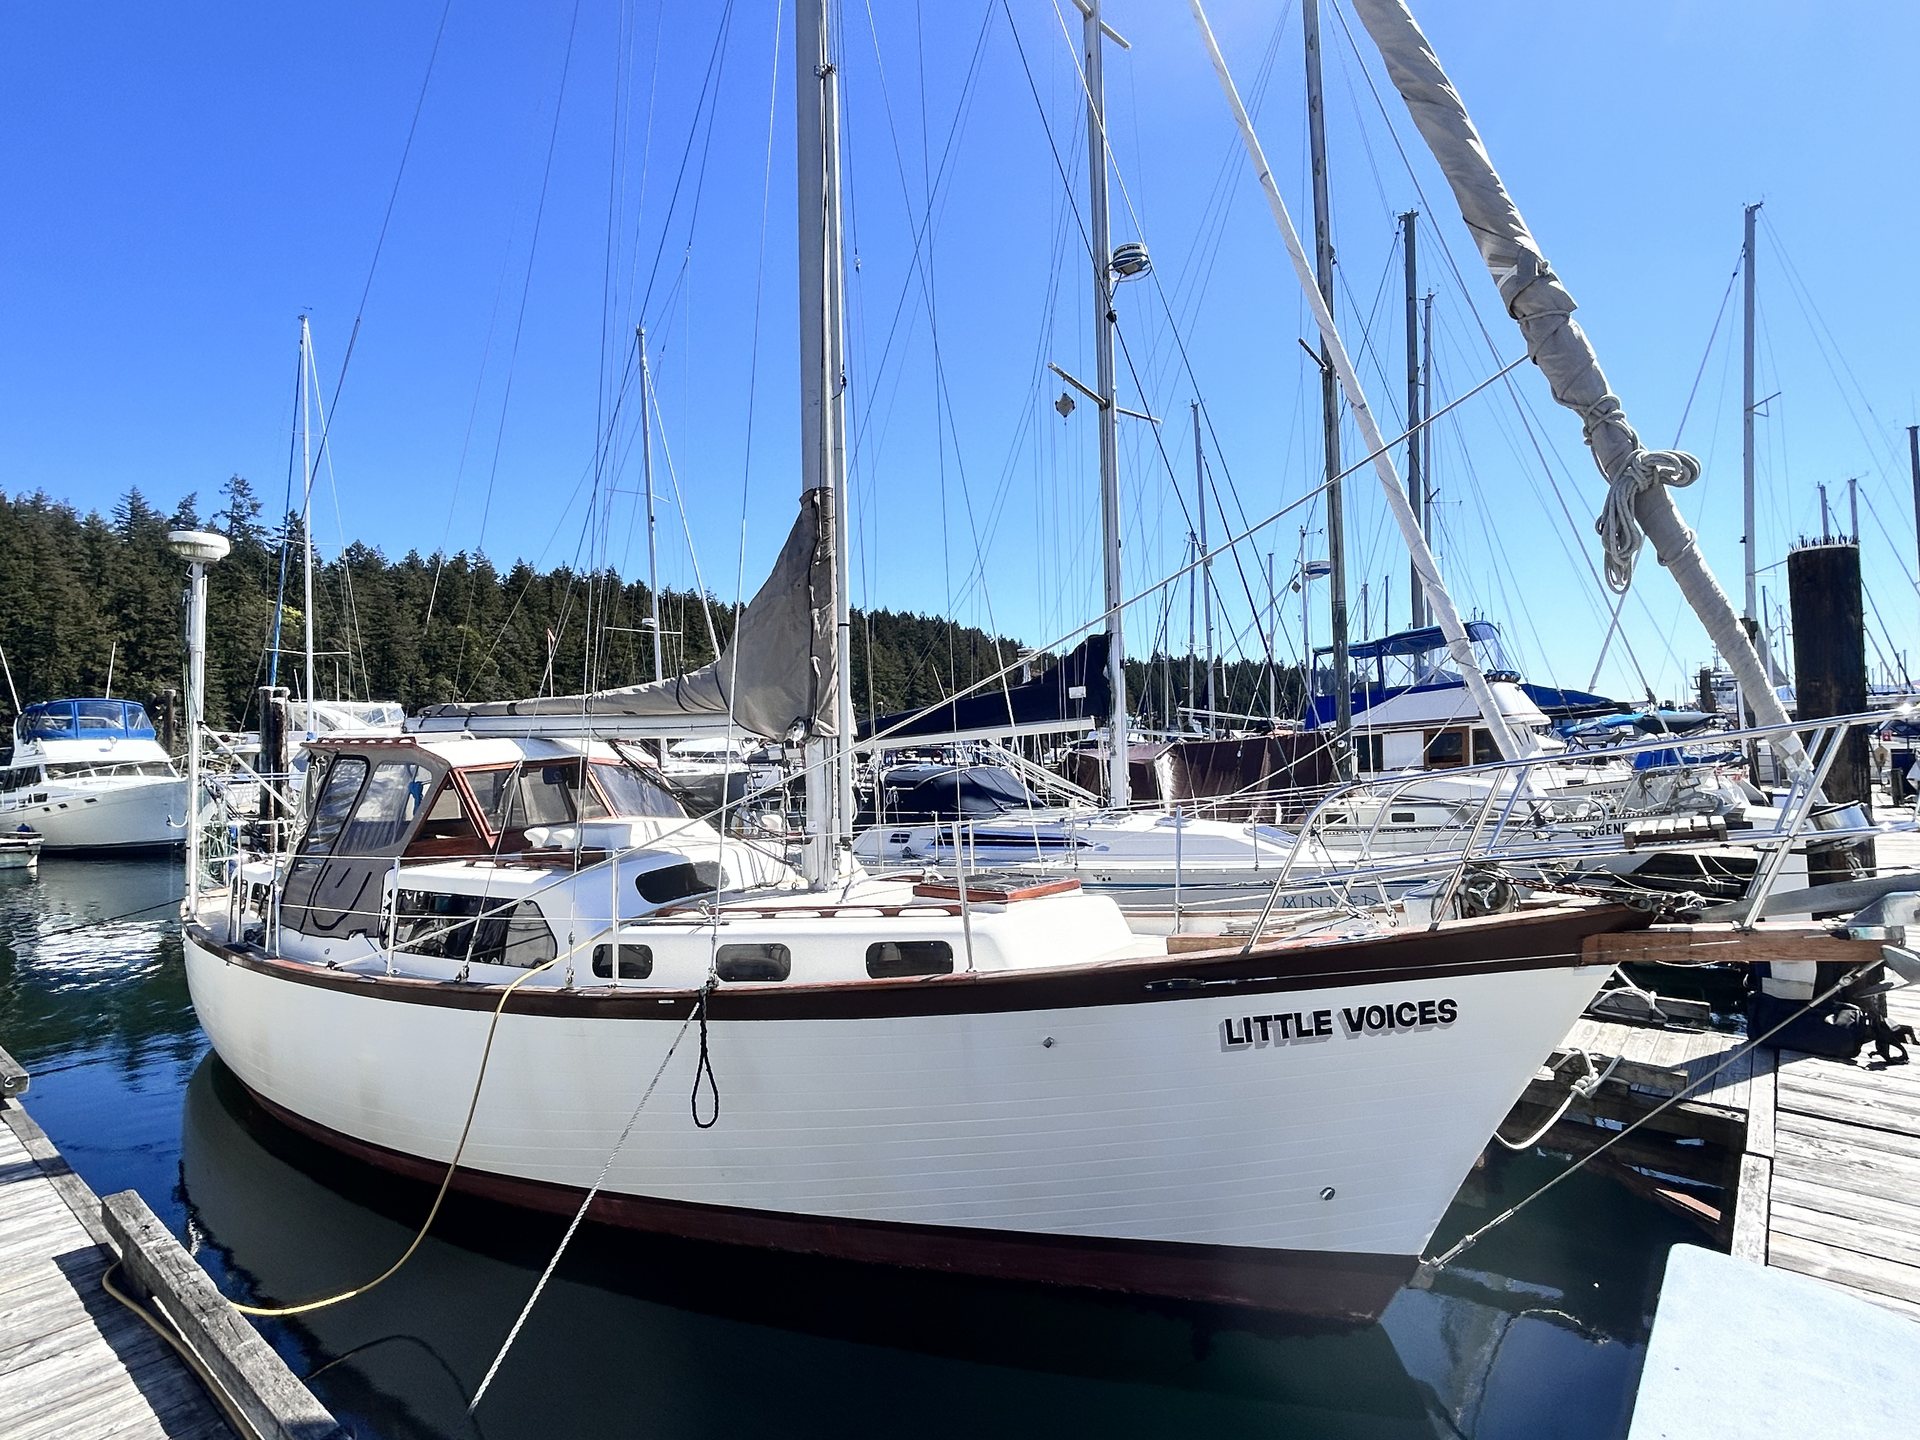 360 VR Virtual Tours of the 1981 Cooper Seabird 37